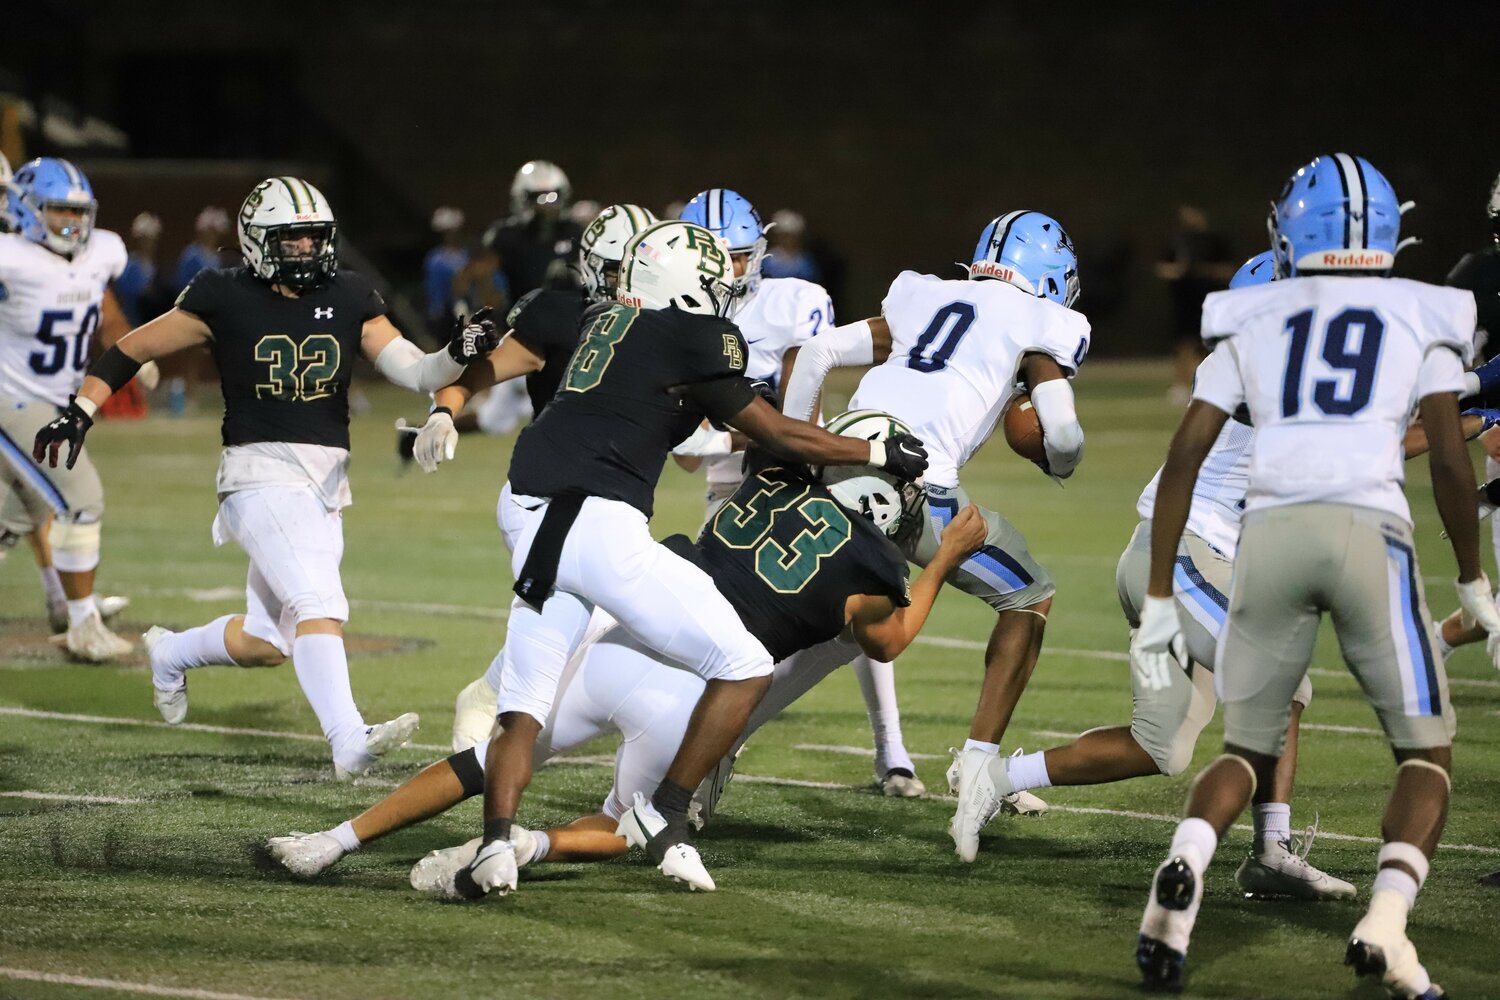 The River Bluff defense made a plethora of clutch stops and prevented Dorman from running away with the game after they scored 21 unanswered points in the first half.